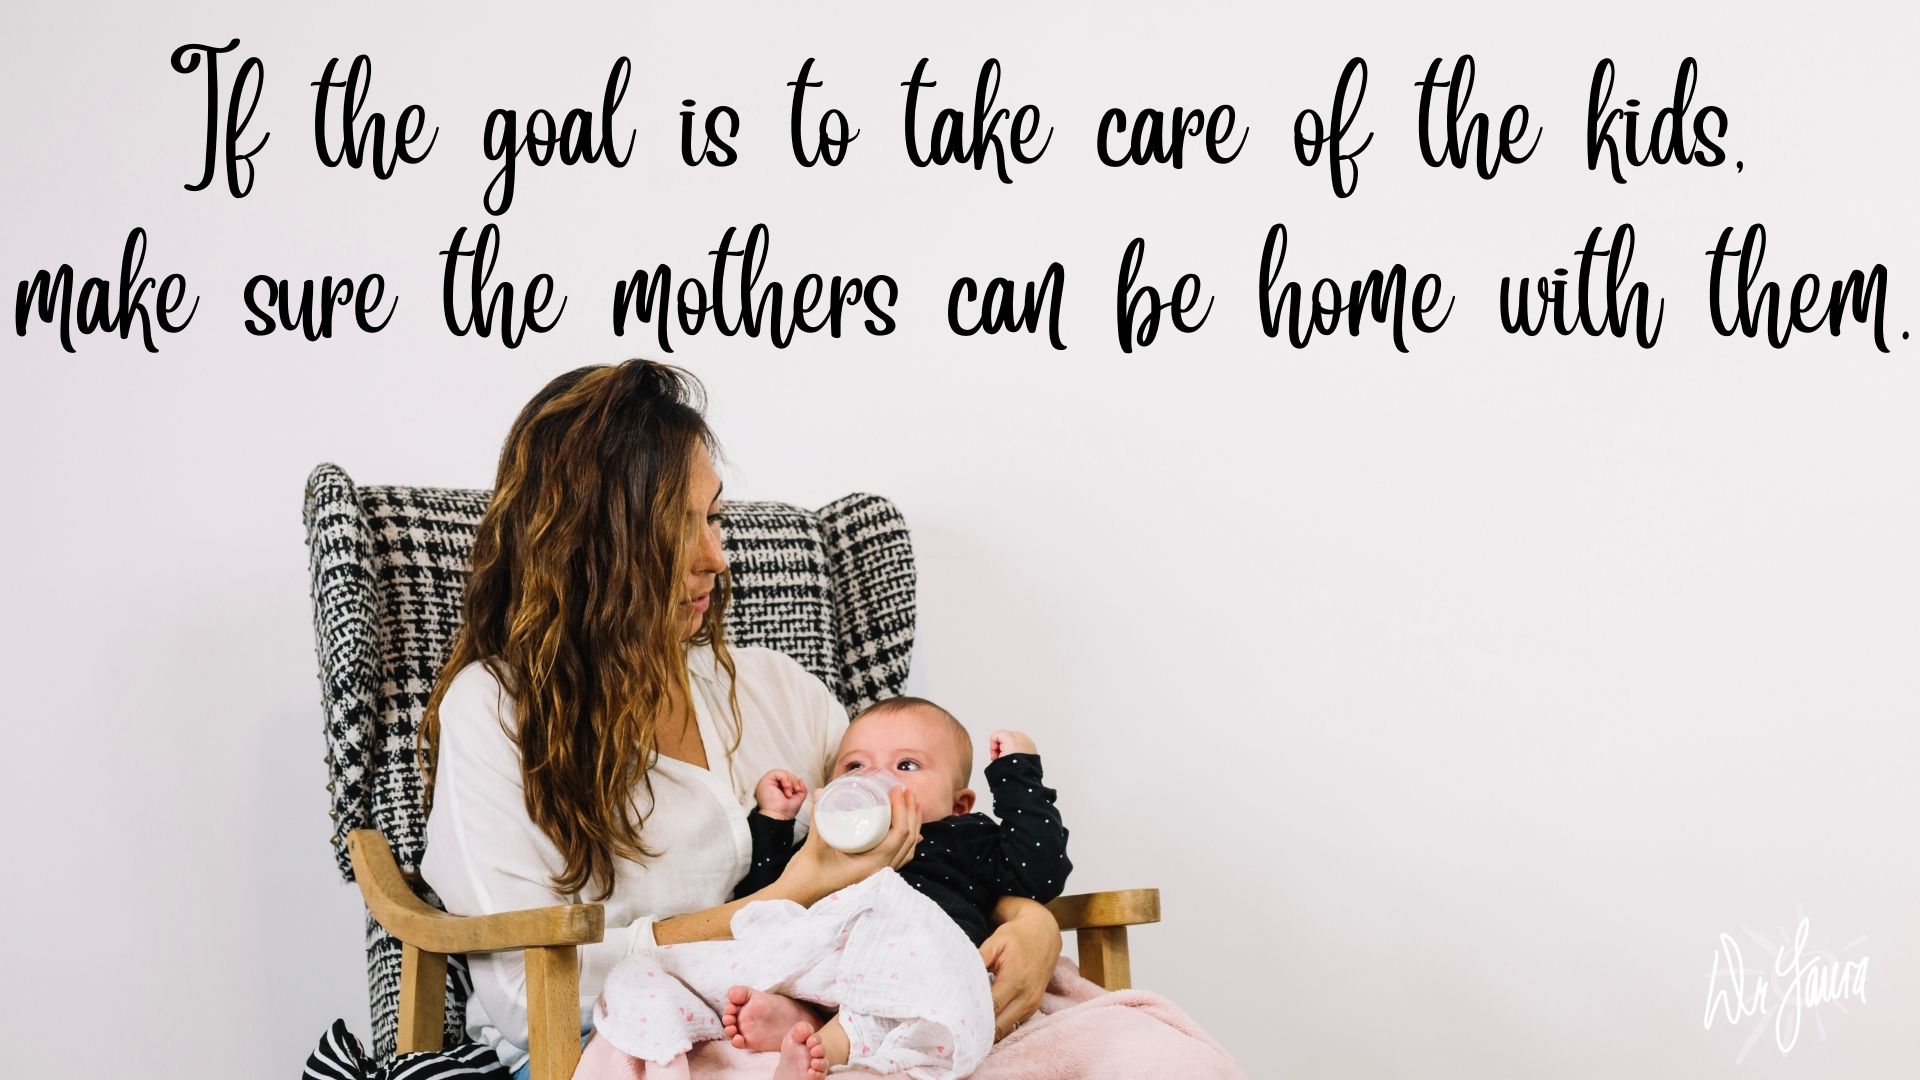 The Impact of Choosing Preschool Over Motherhood - If the goal is to take care of the kids, make sure the mothers can be home with them.